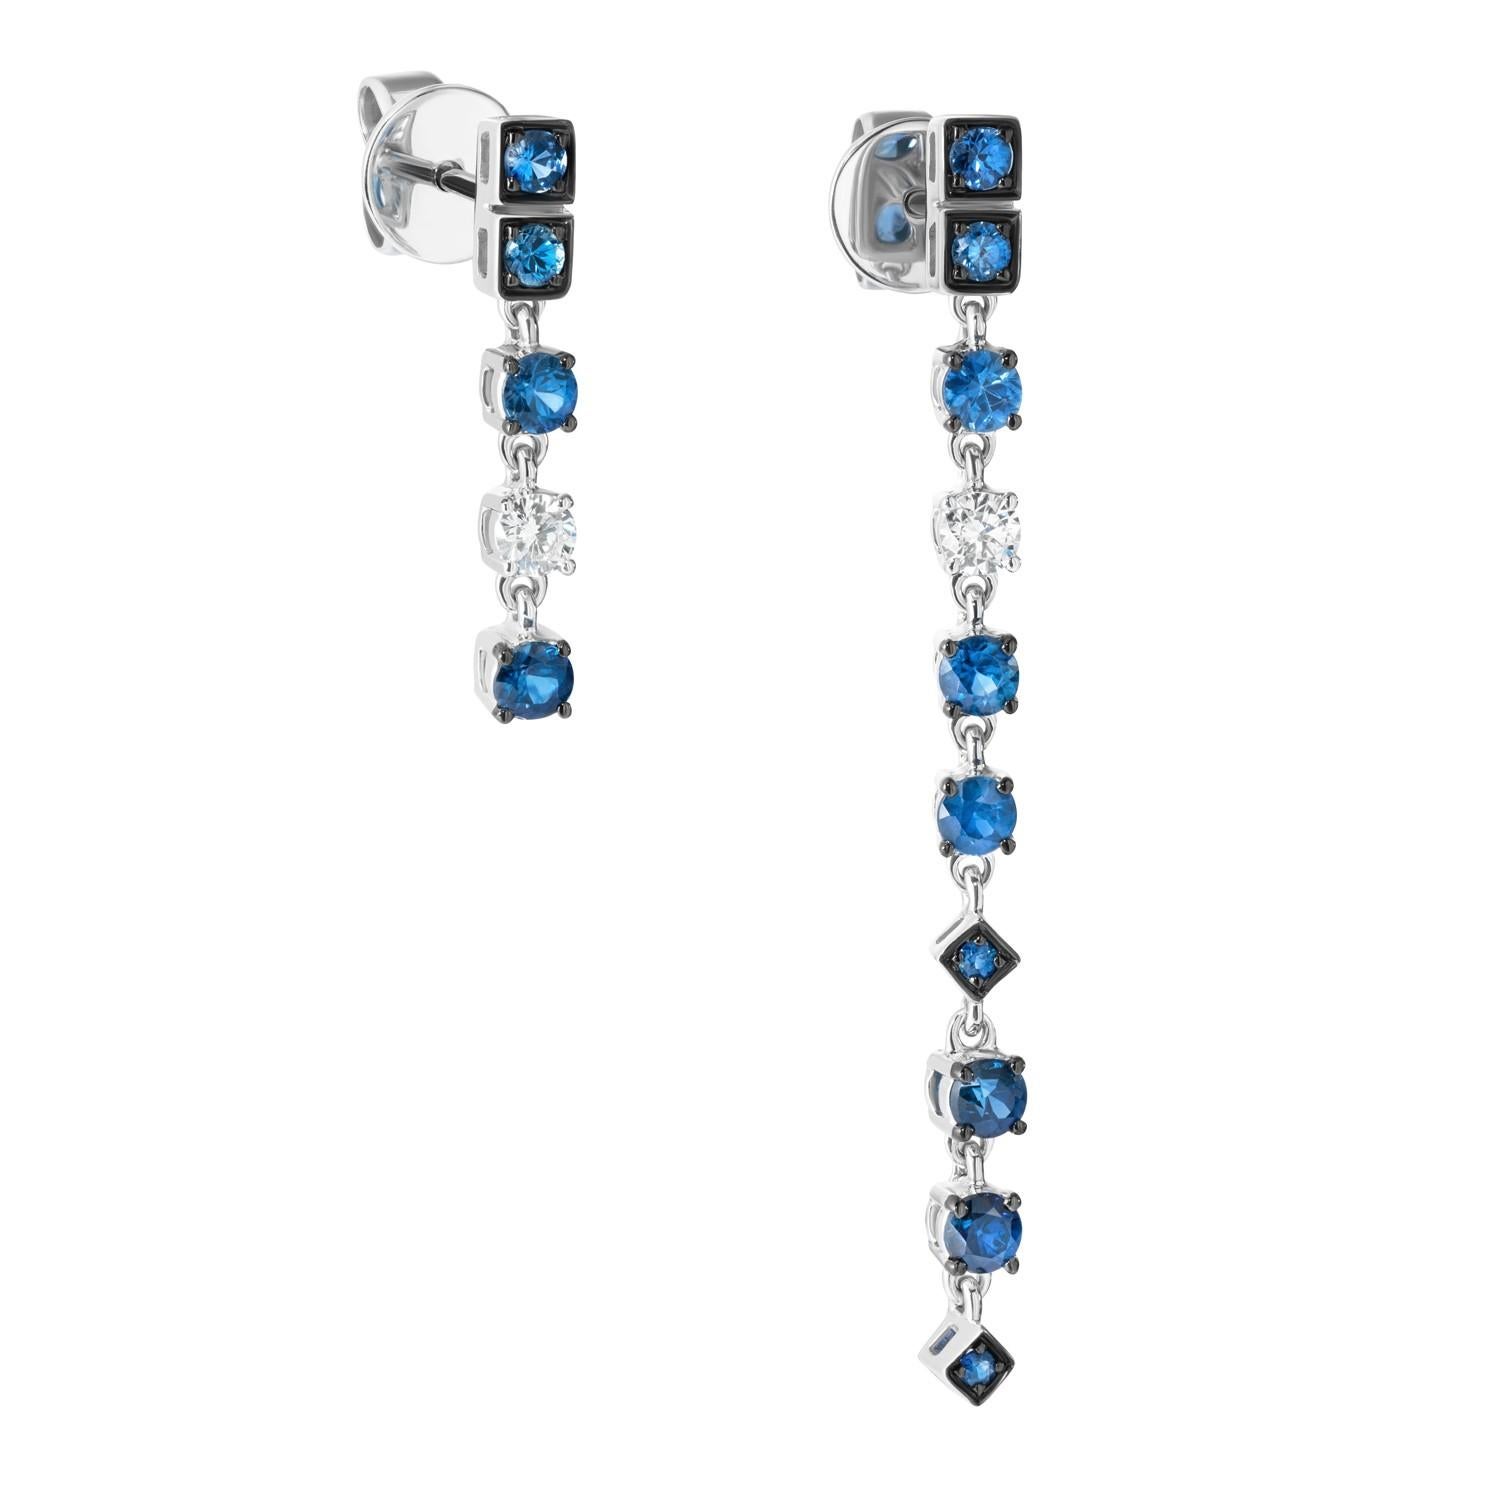 Earrings White Gold 14 K 

Diamond 2-RND-0,12-F/VS2A 
Blue Sapphire 13-RND-0,07 Т(5)/3

Weight 2.23 grams

With a heritage of ancient fine Swiss jewelry traditions, NATKINA is a Geneva based jewellery brand, which creates modern jewellery